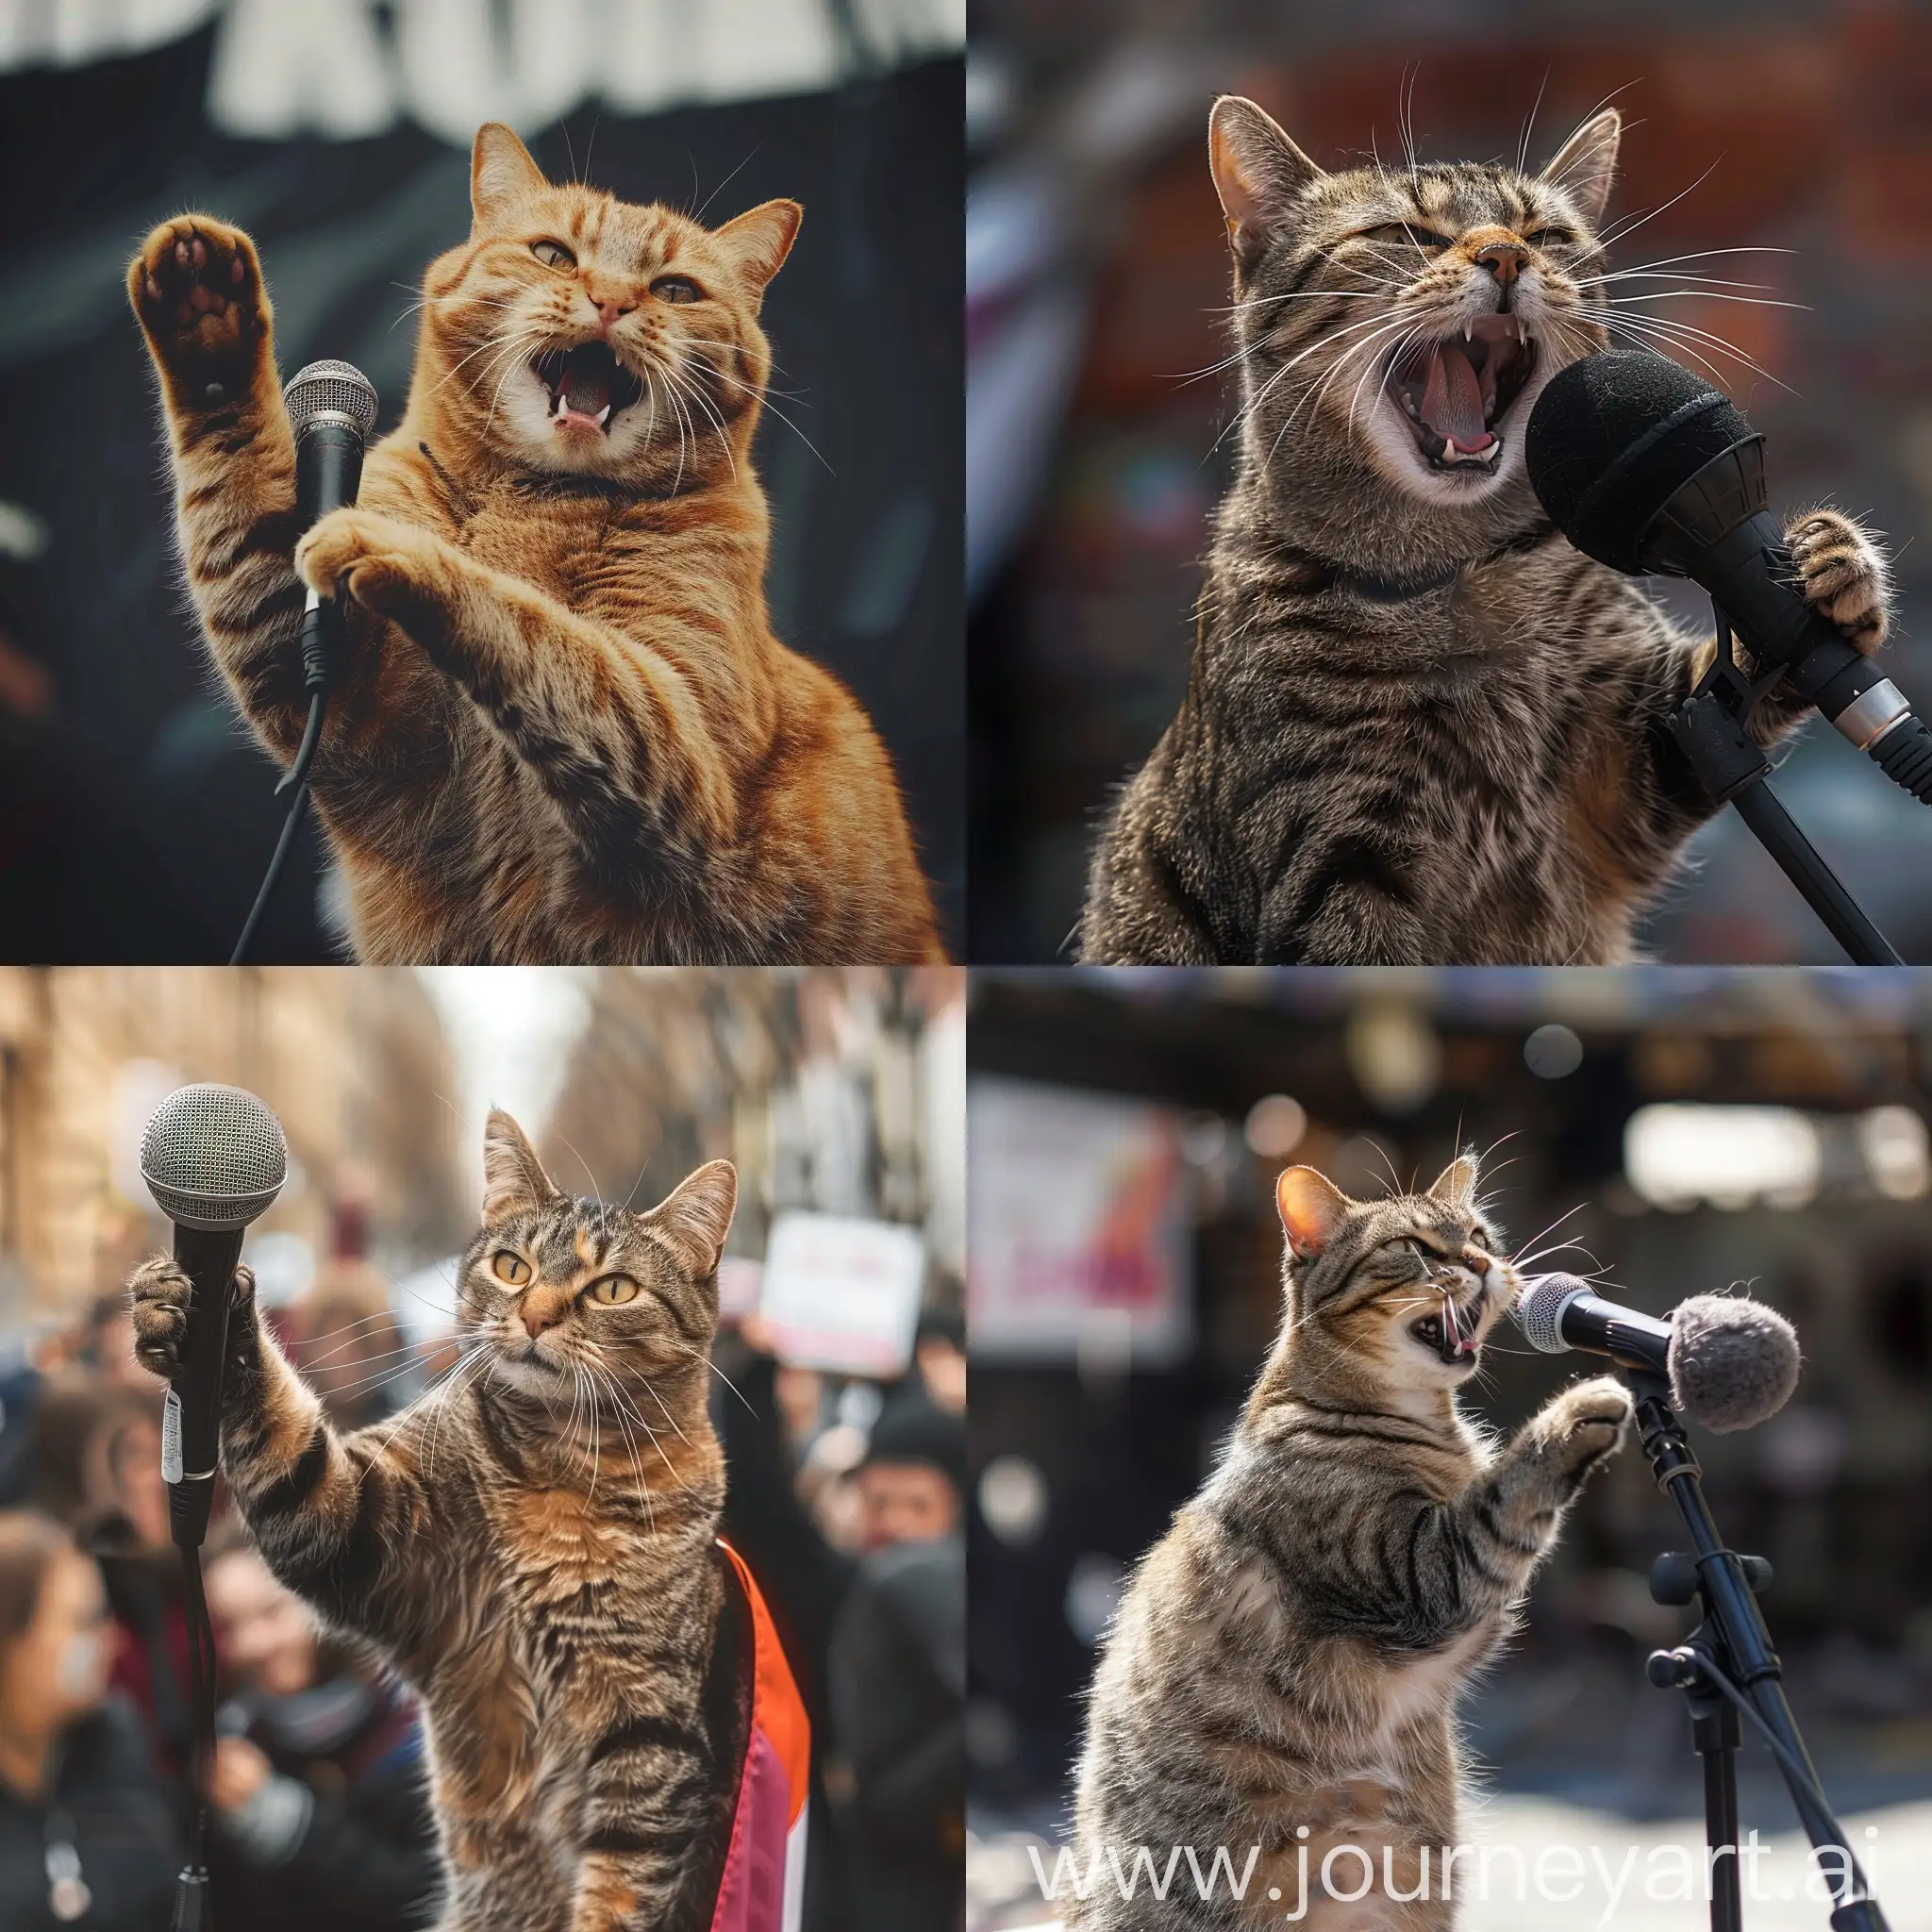 cat on protest speaking through microphone